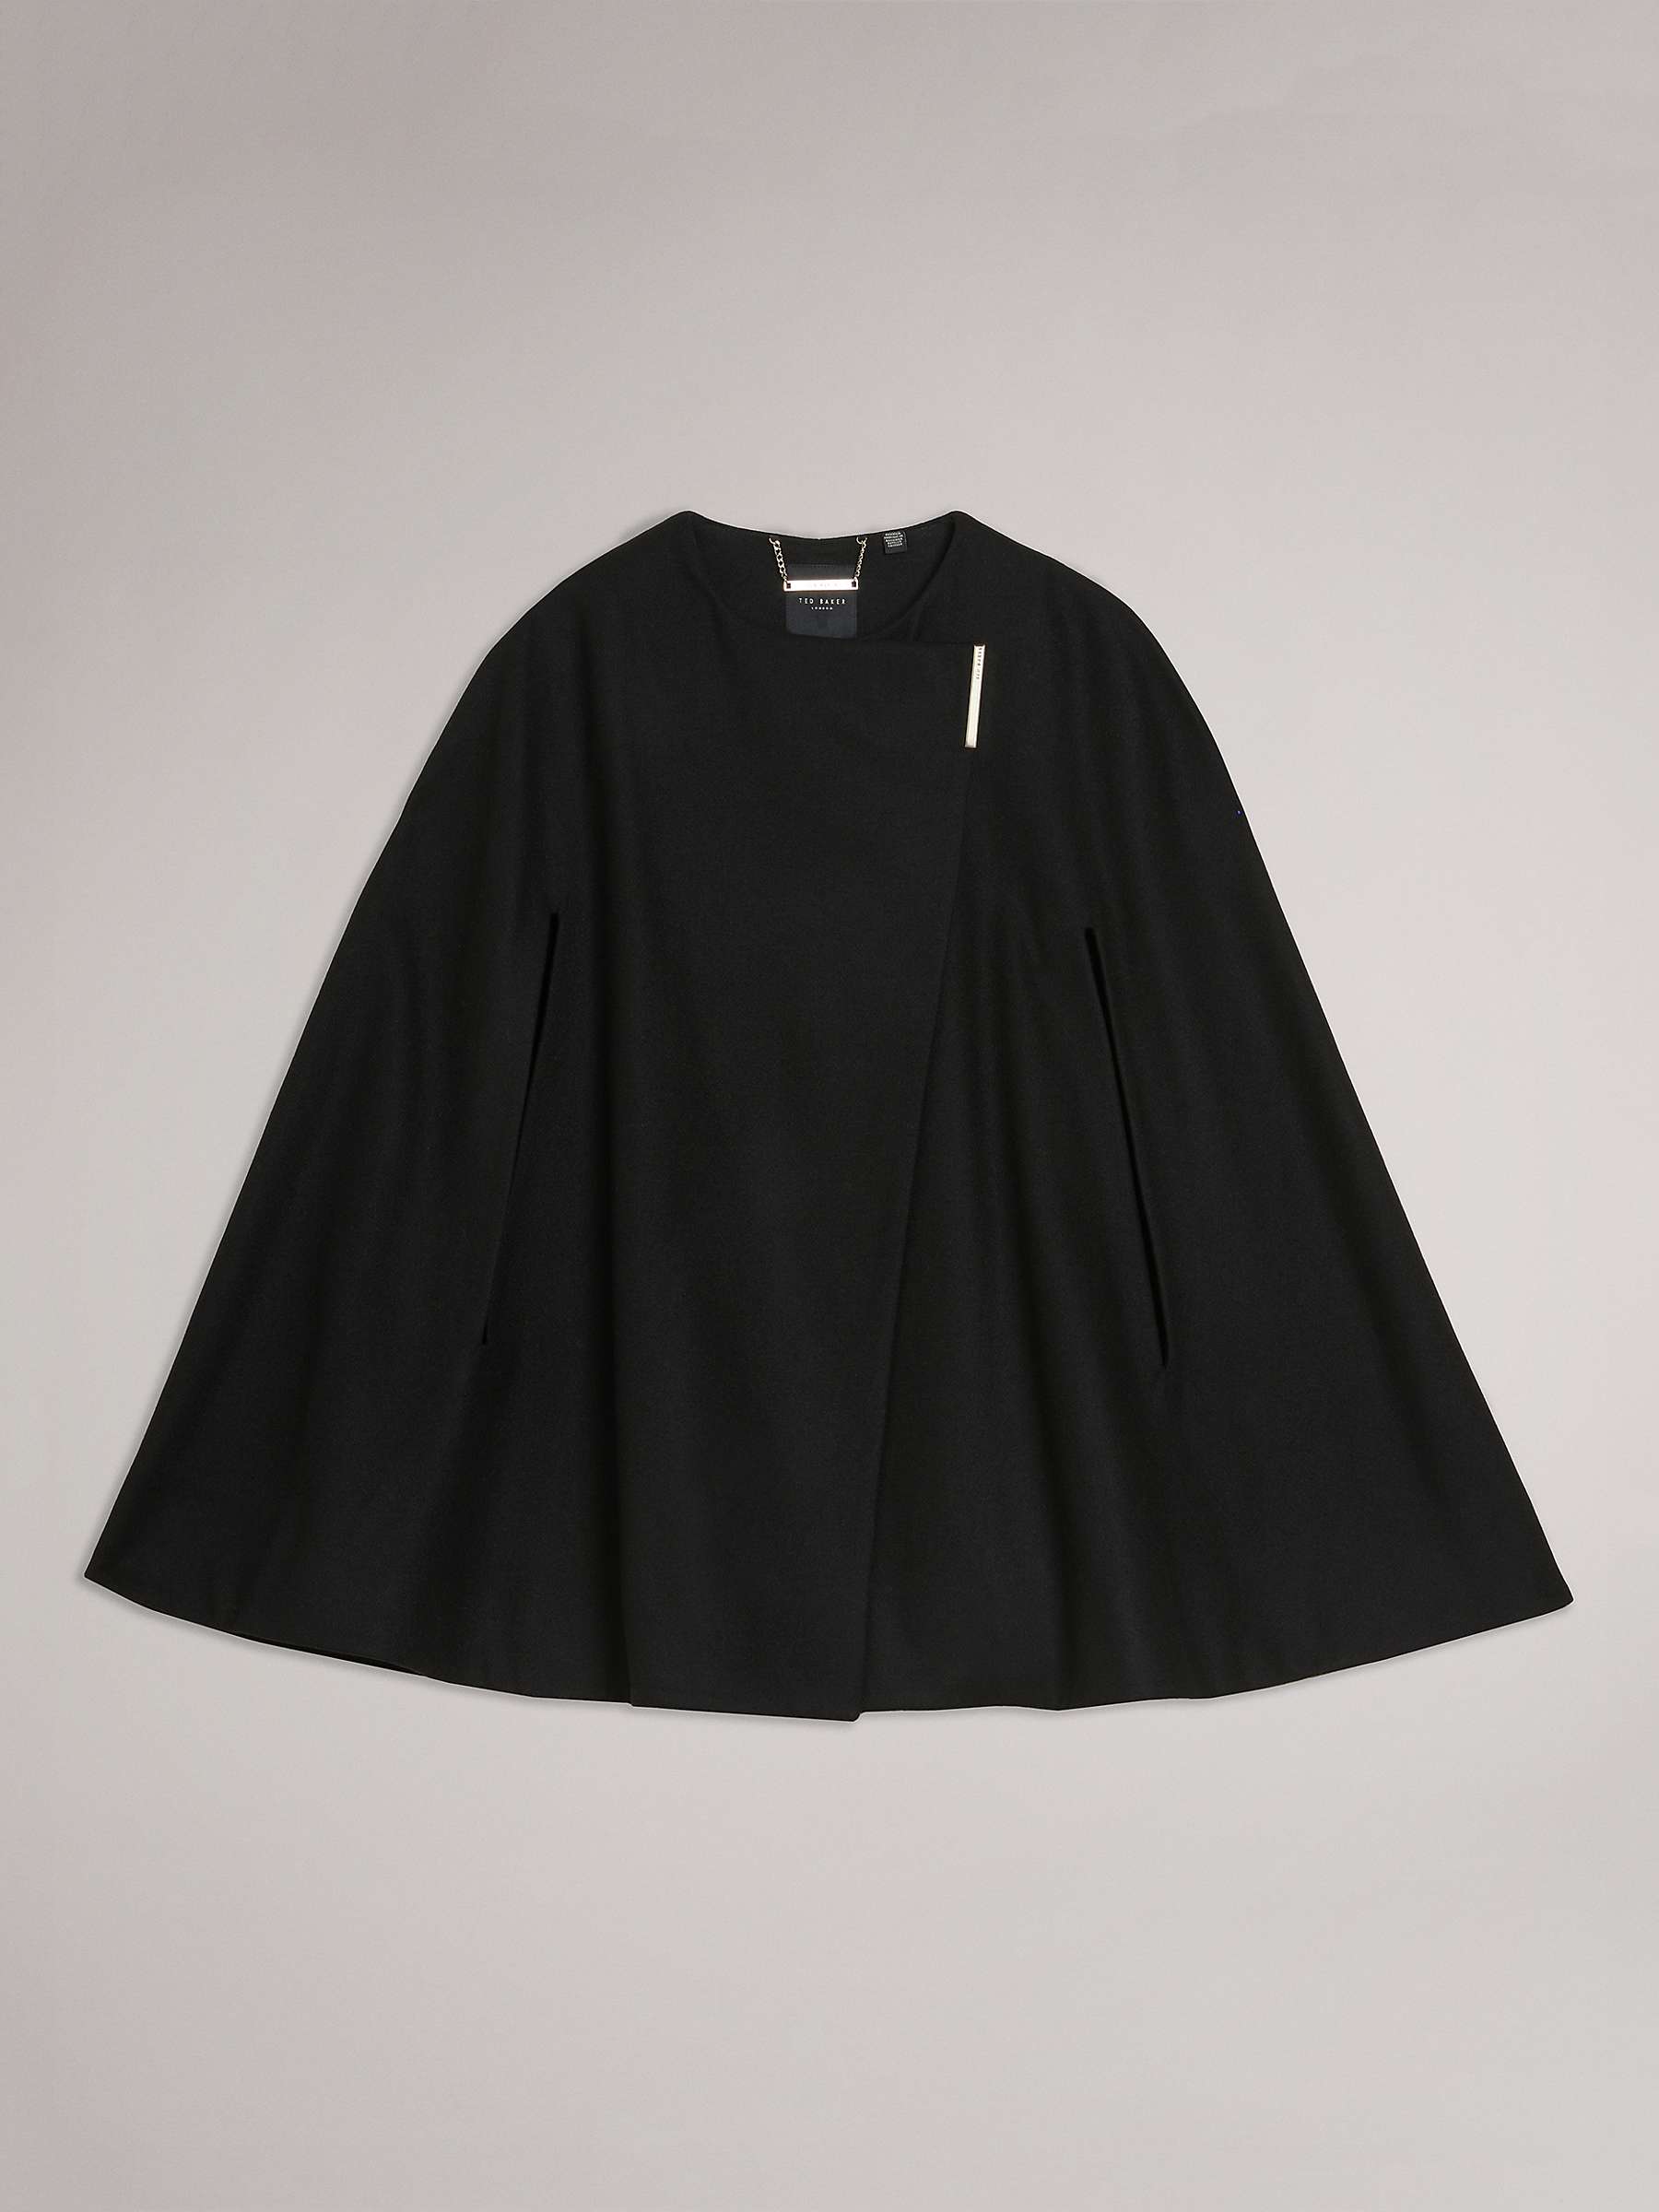 Buy Ted Baker Valariy Wool and Cashmere Blend Cape Online at johnlewis.com